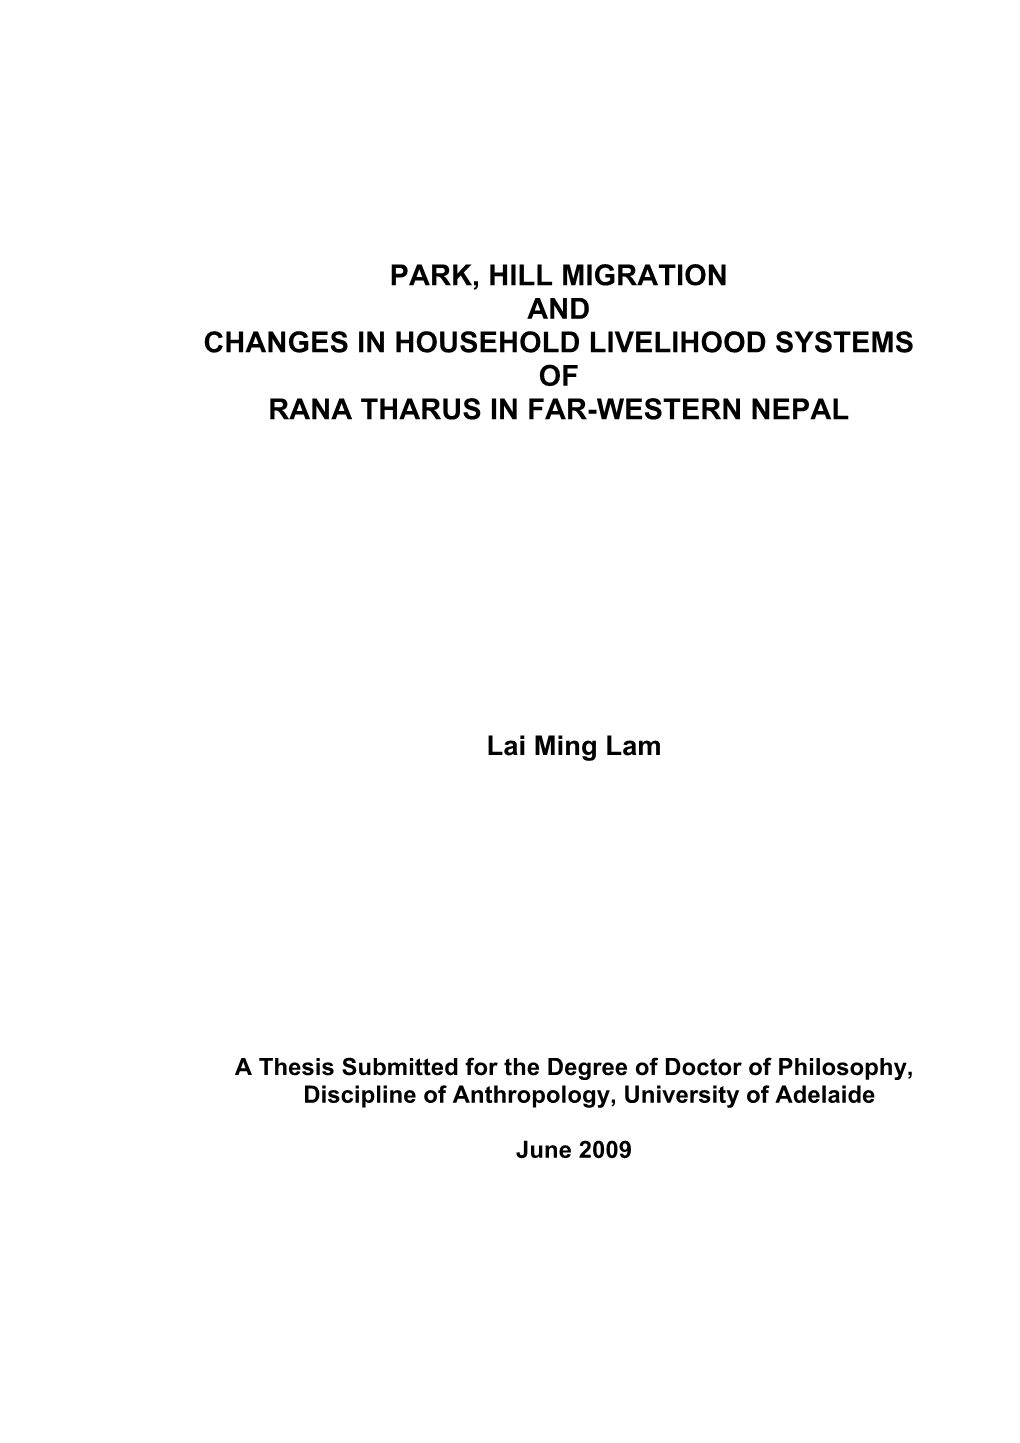 Park, Hill Migration and Changes in Household Livelihood Systems of Rana Tharus in Far-Western Nepal